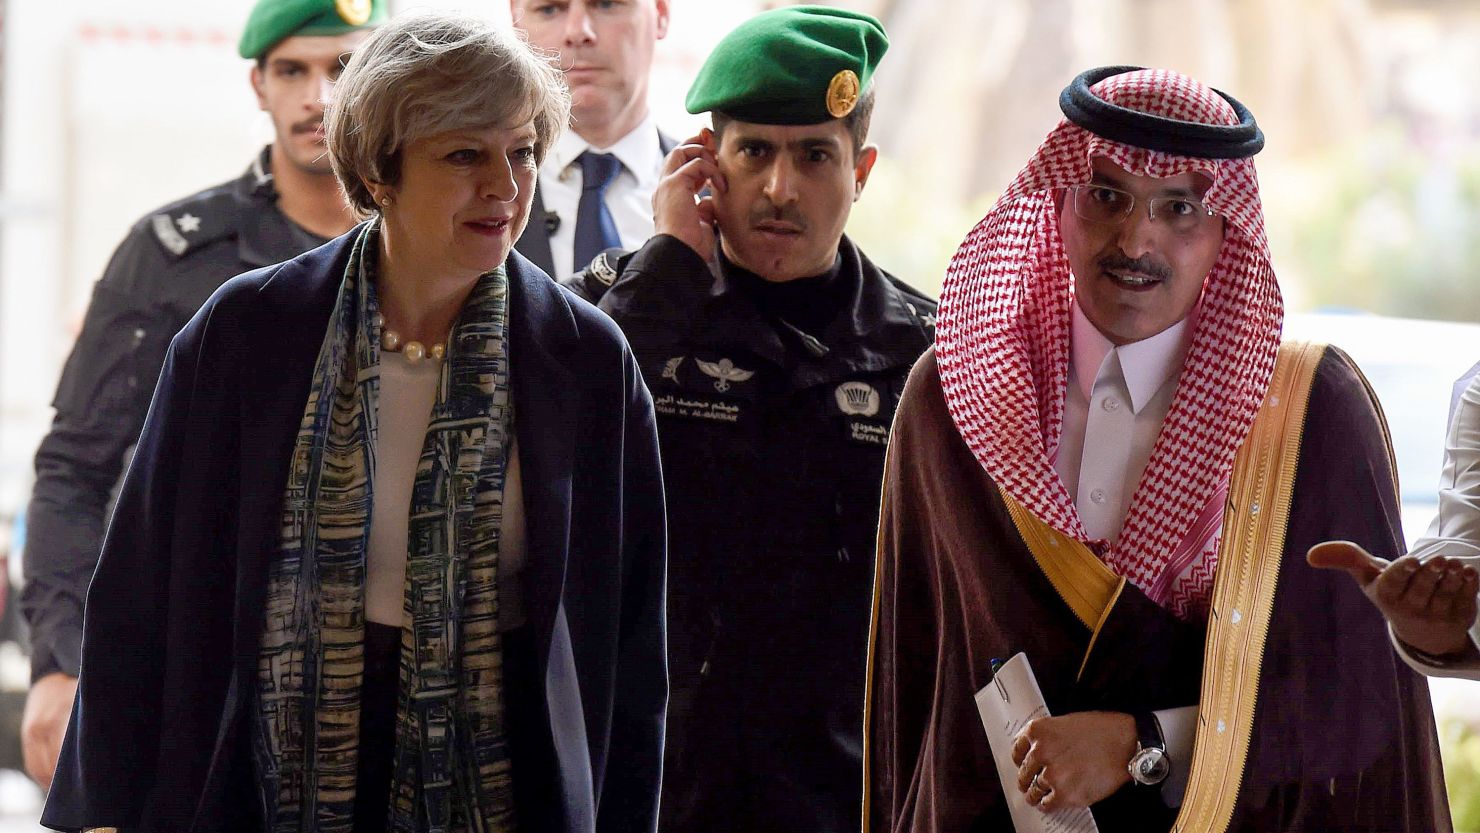 British Prime Minister Theresa May is escorted by Saudi Finance Minister Mohammed al-Jadaan at the Saudi Stock Exchange Riyadh on Tuesday.